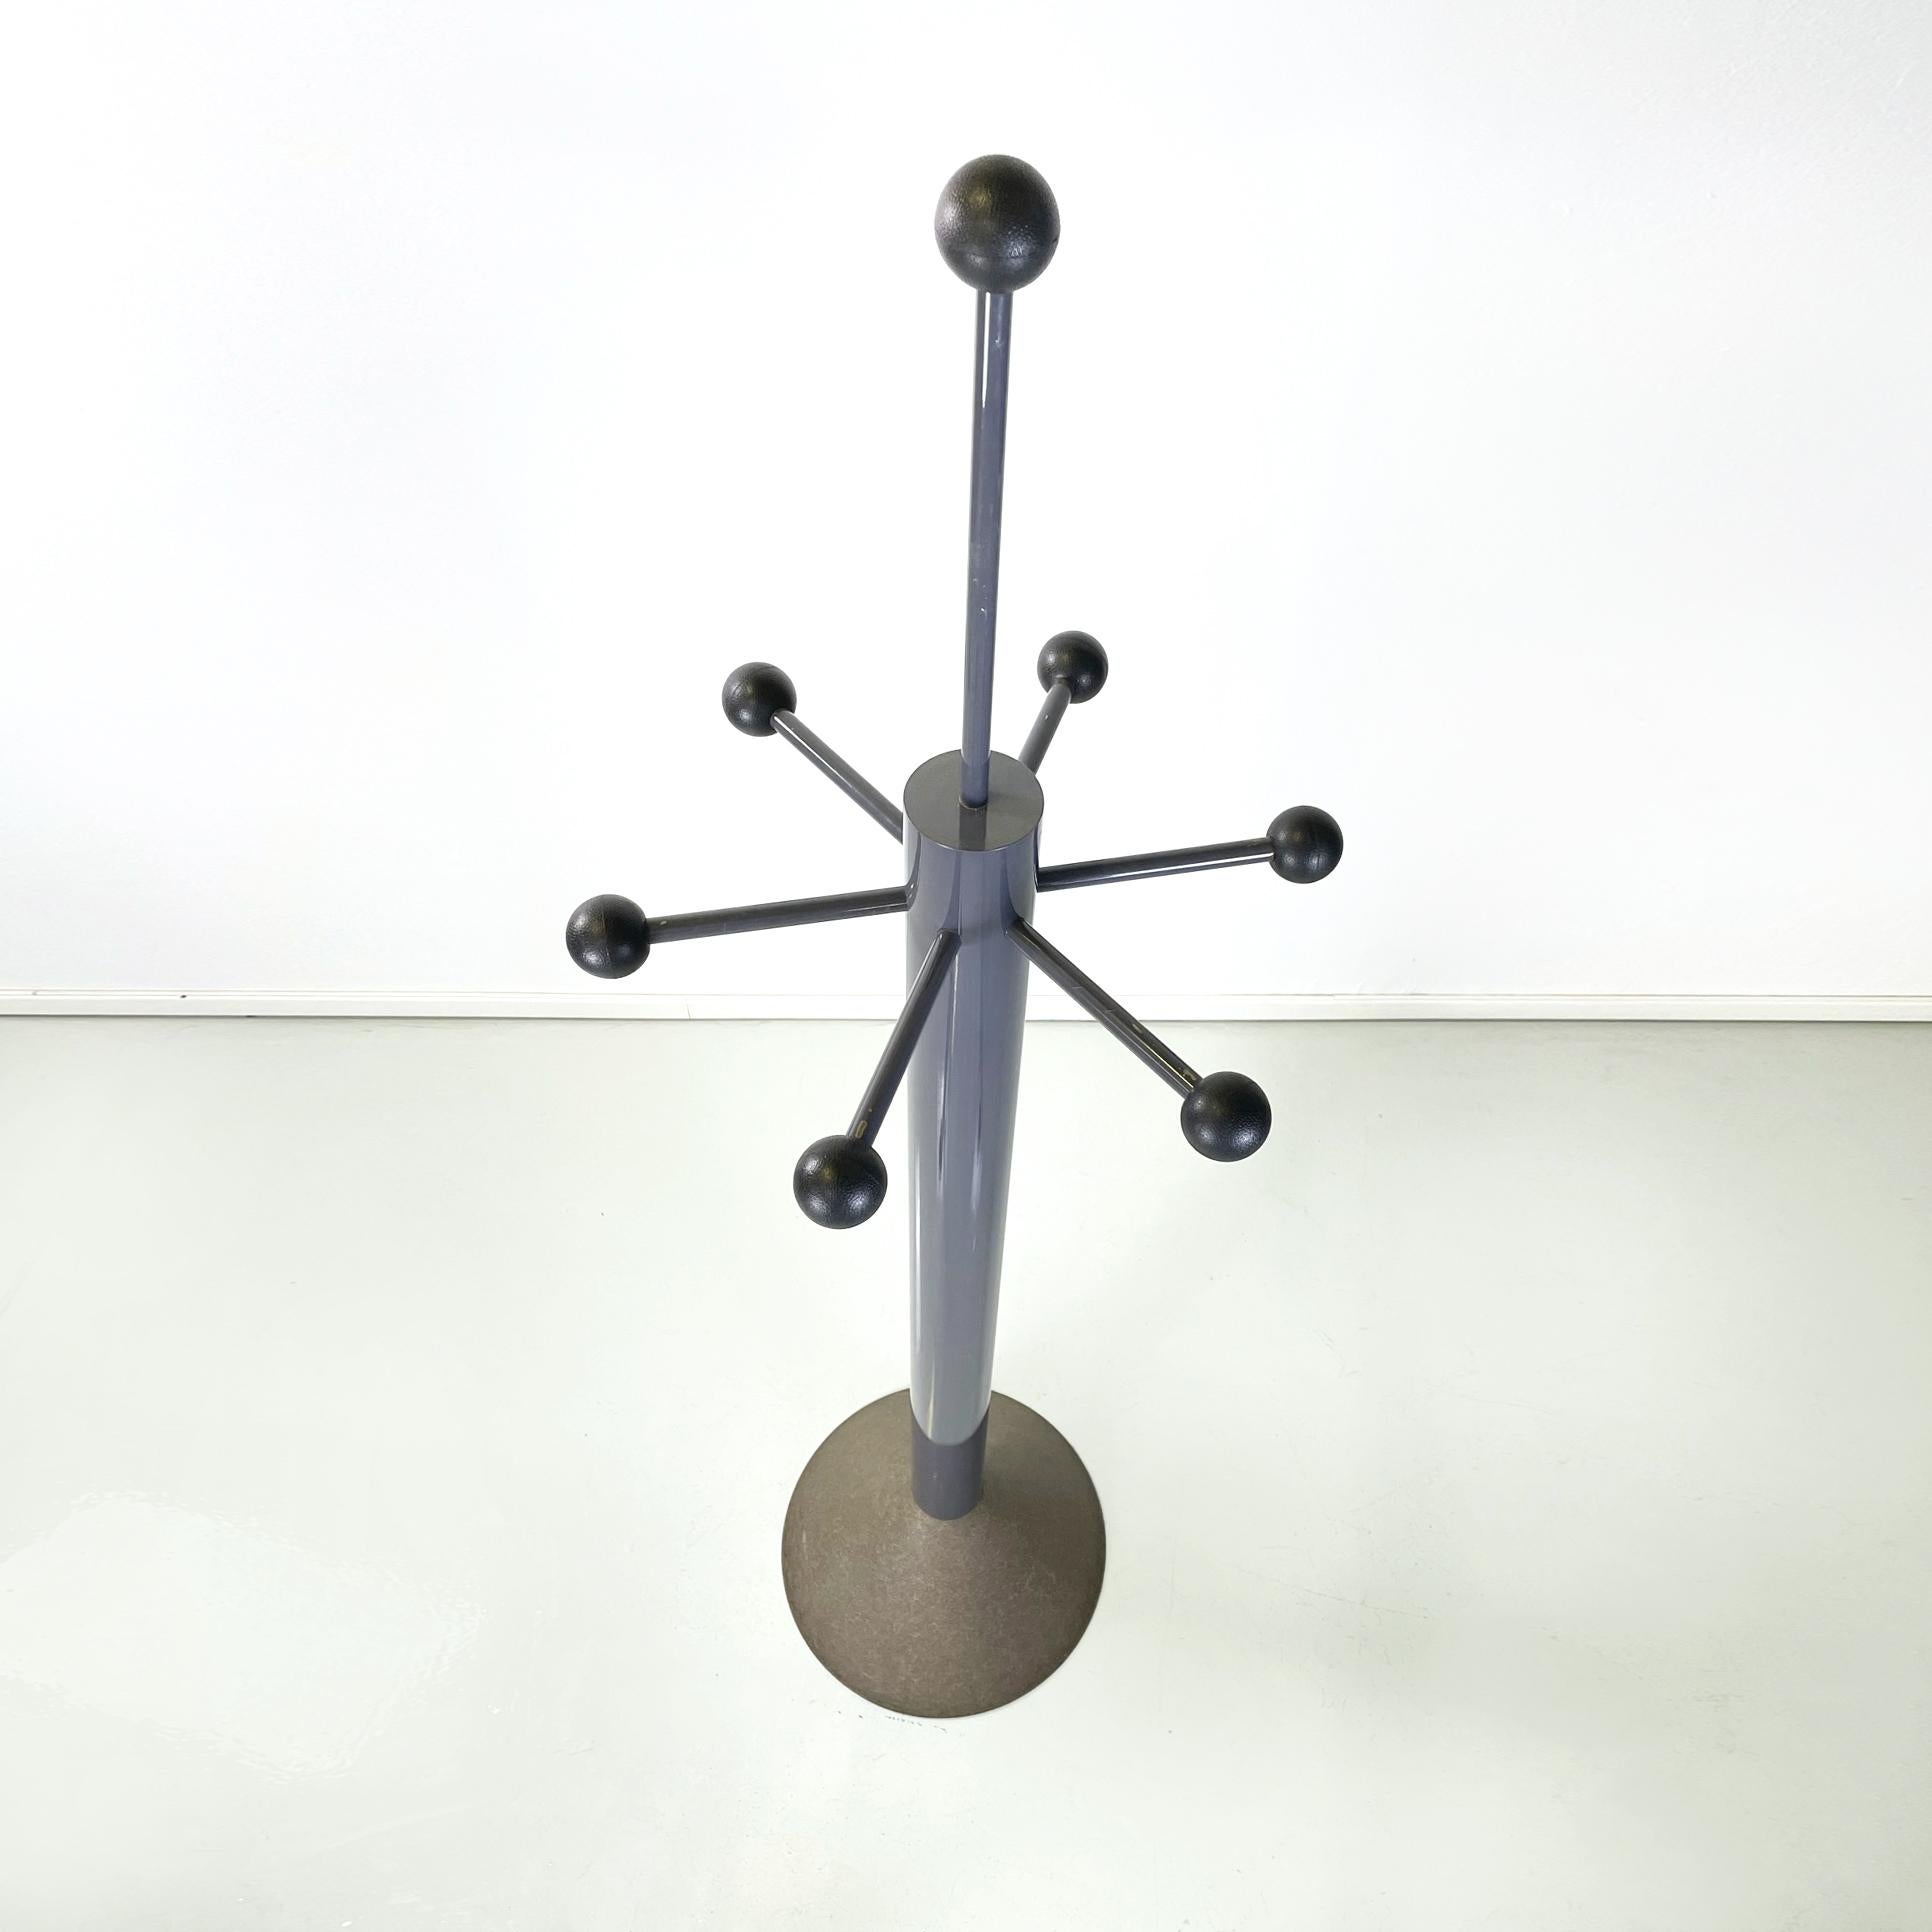 Italian modern Coat stand mod. Velasca by Alessandro Mendini for Elam UNO, 1980s
Coat stand mod. Velasca with a round base. The structure consists of a central column with a round section in gray painted metal, where the coat hangers are placed on